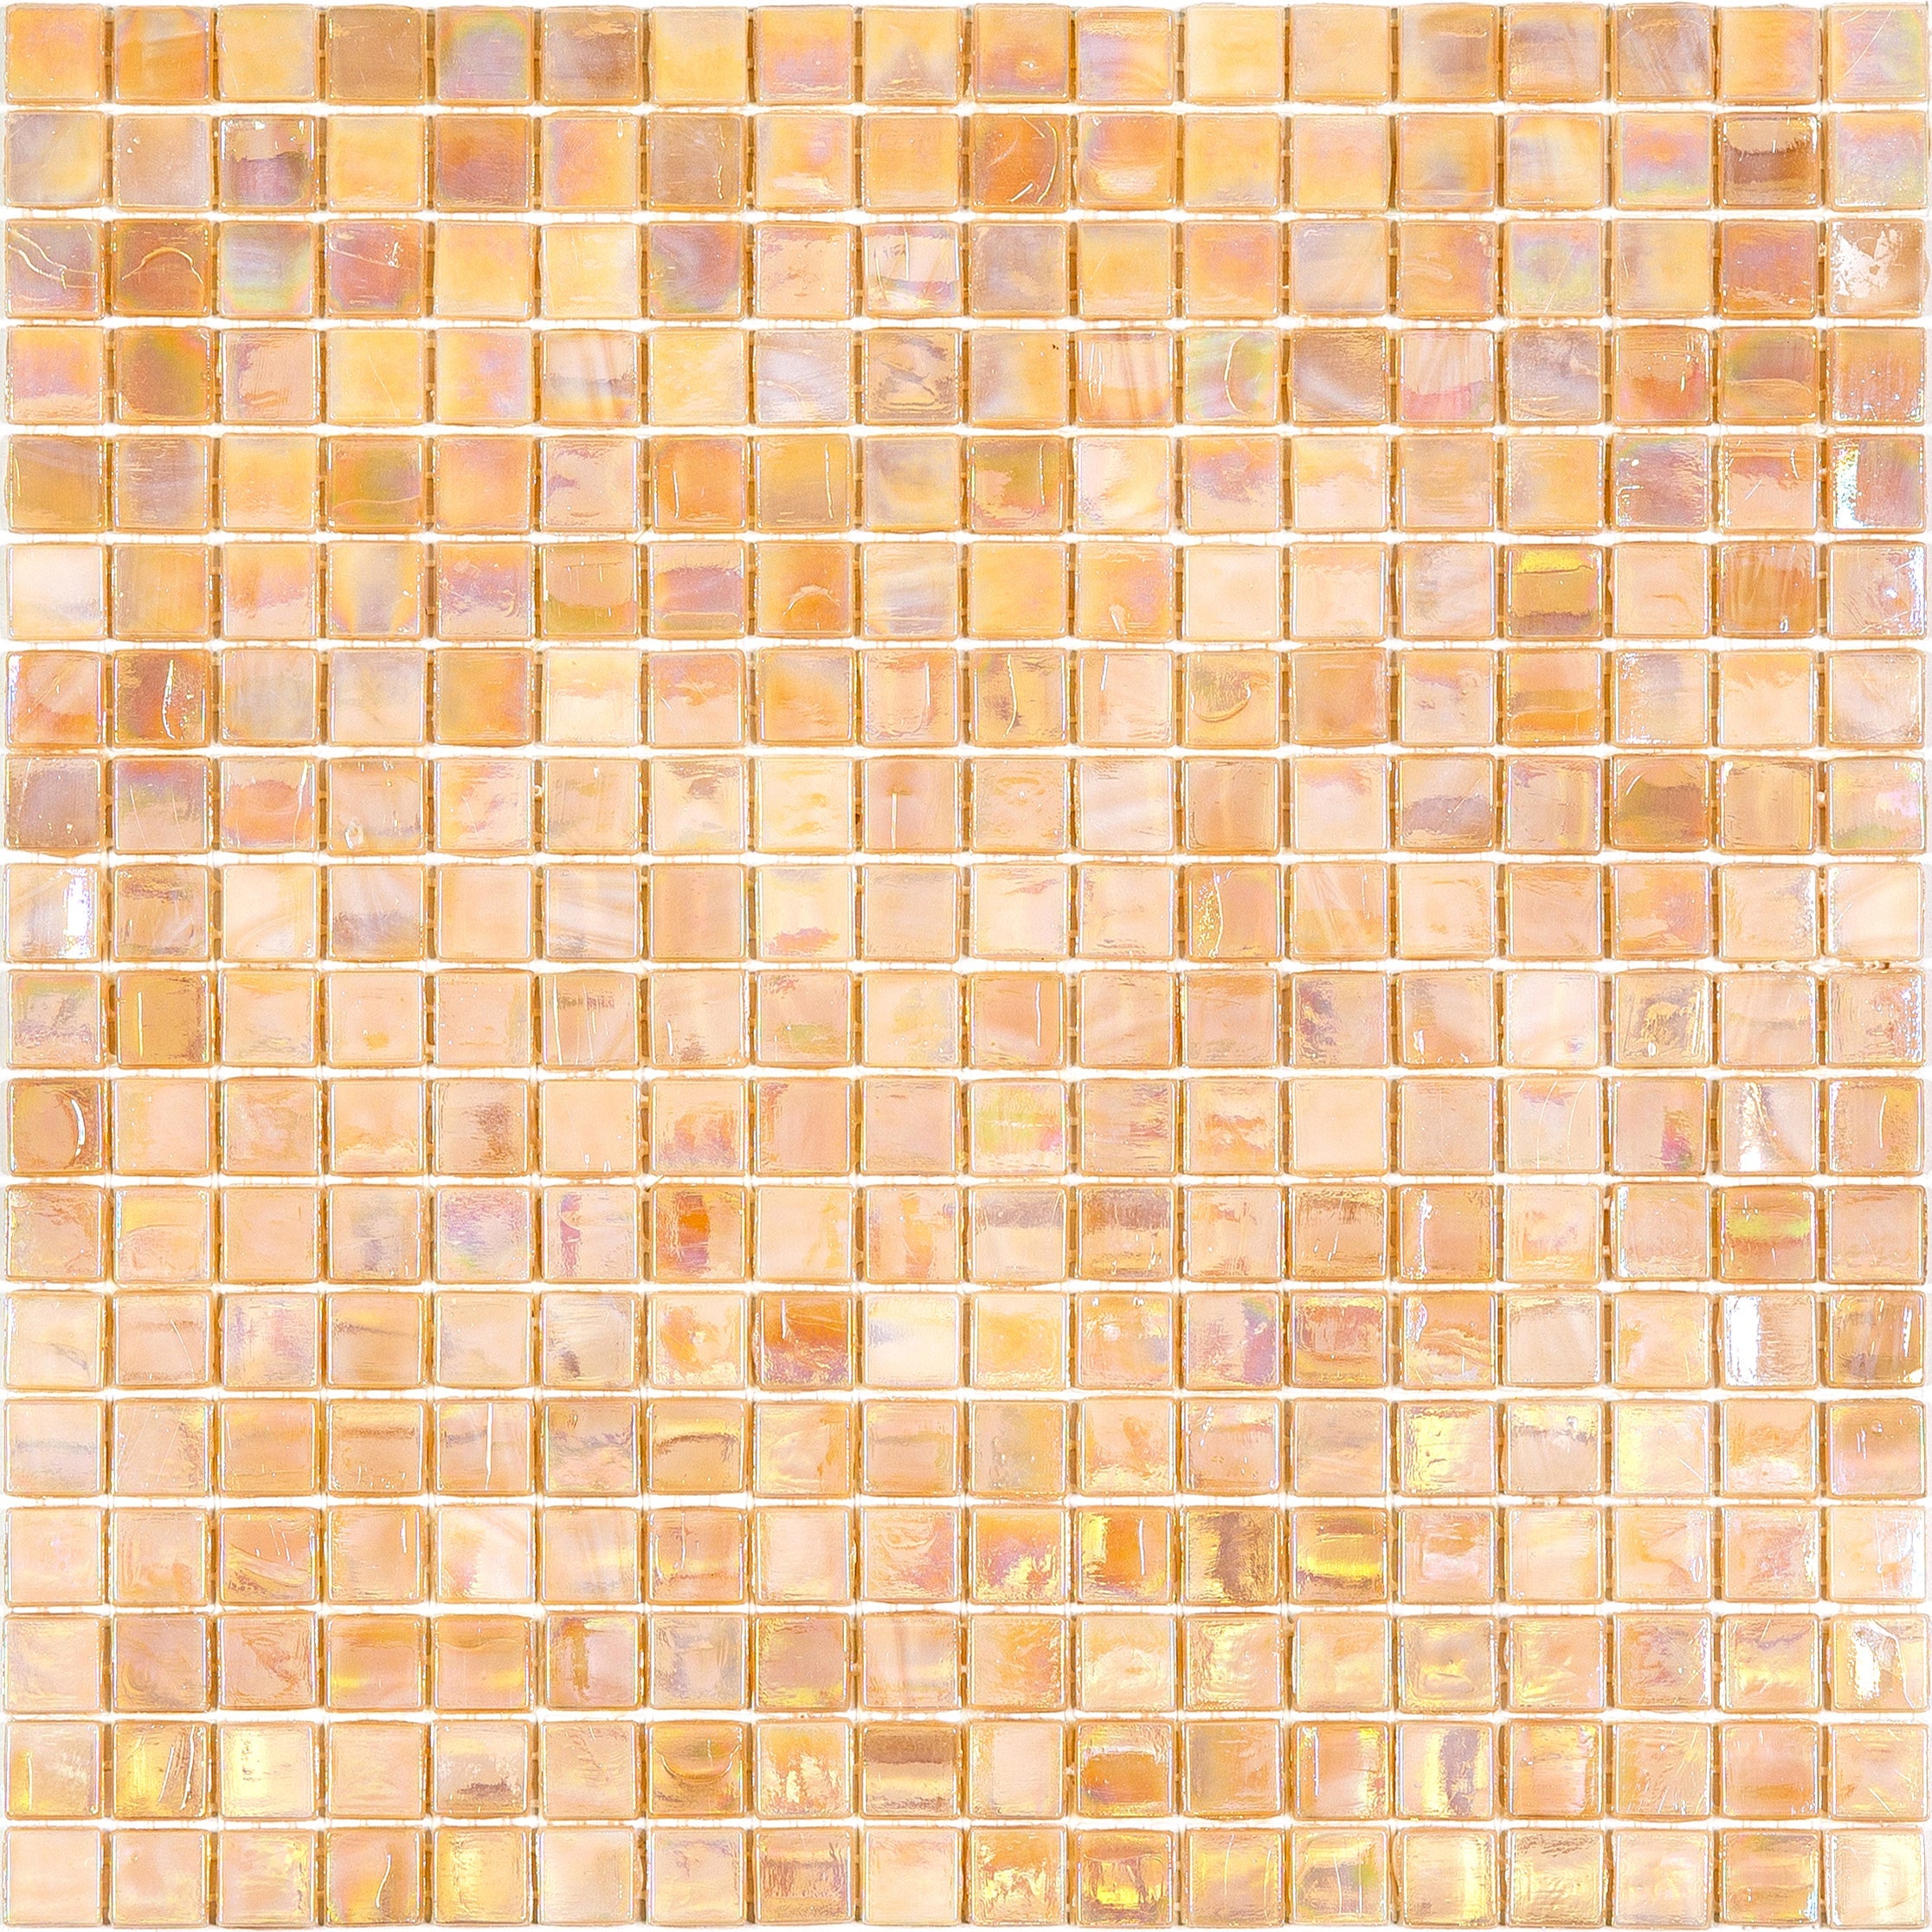 mir alma solid colors 0_6 inch nibble ne92 wall and floor mosaic distributed by surface group natural materials